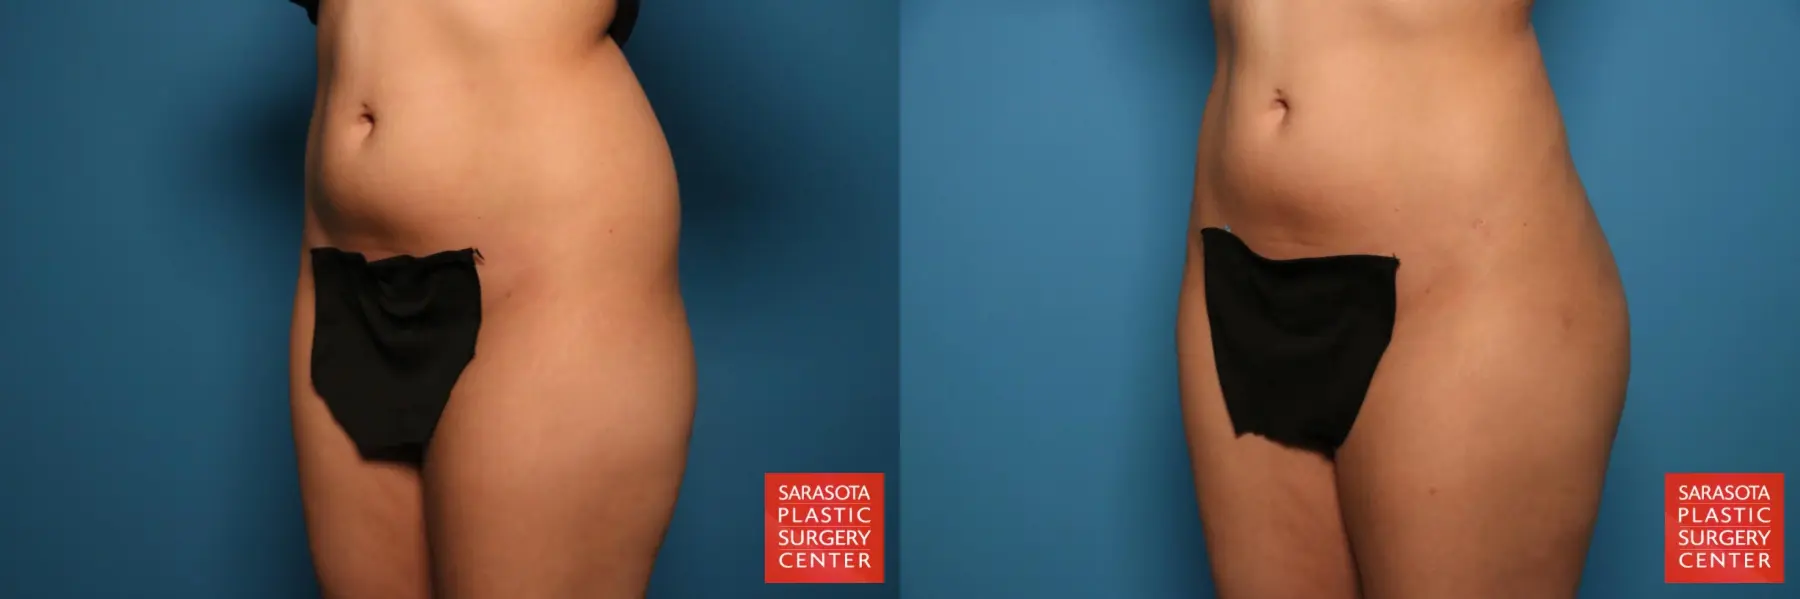 Liposuction: Patient 15 - Before and After 2